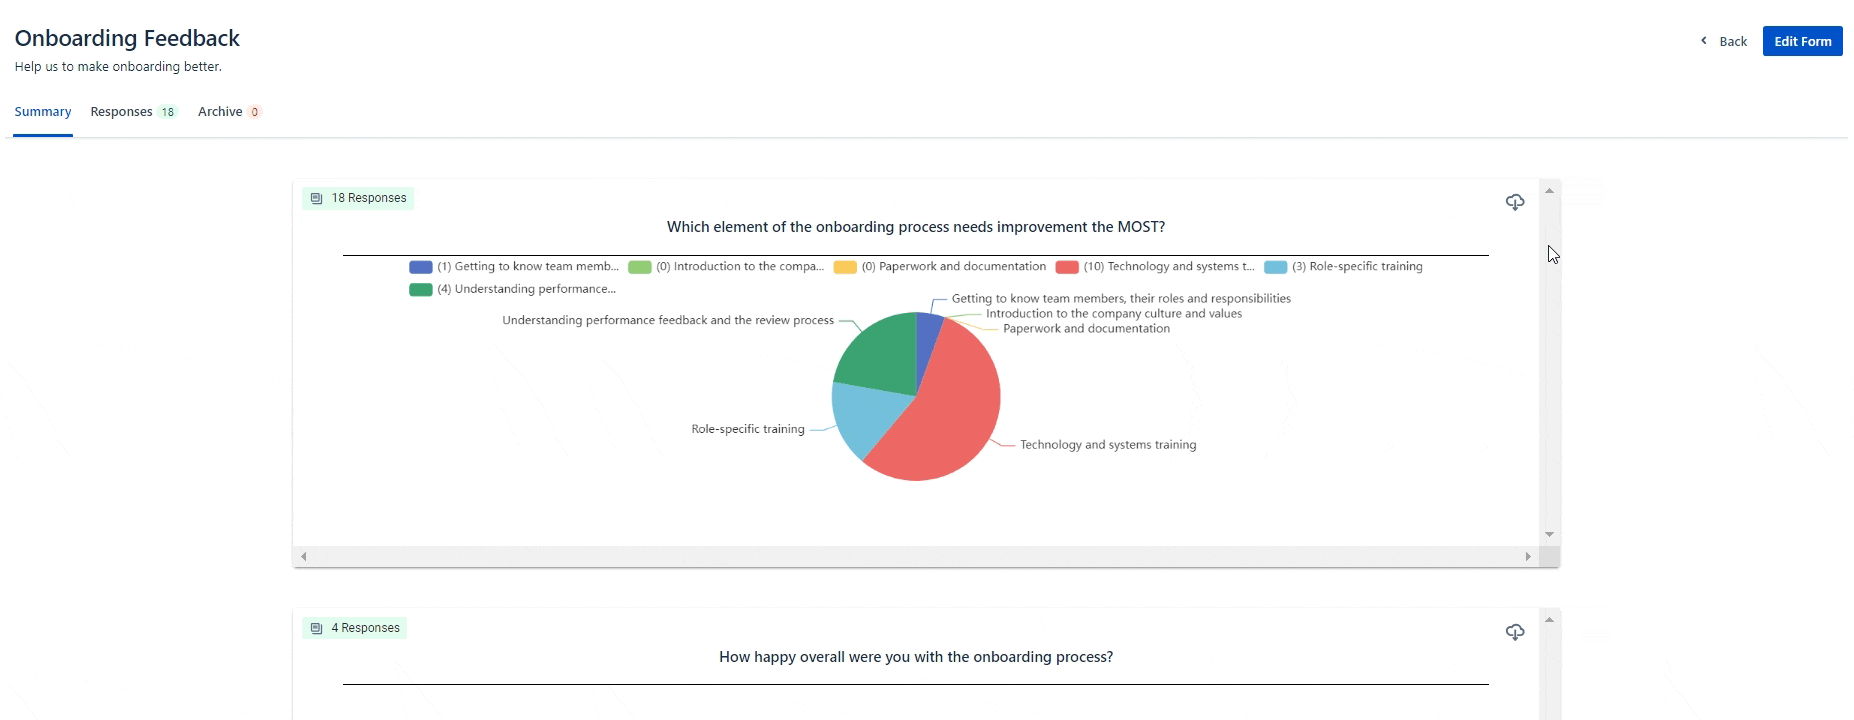 A GIF of a user clicking the export icon in the upper right of a pie chart in Forms for Confluence.